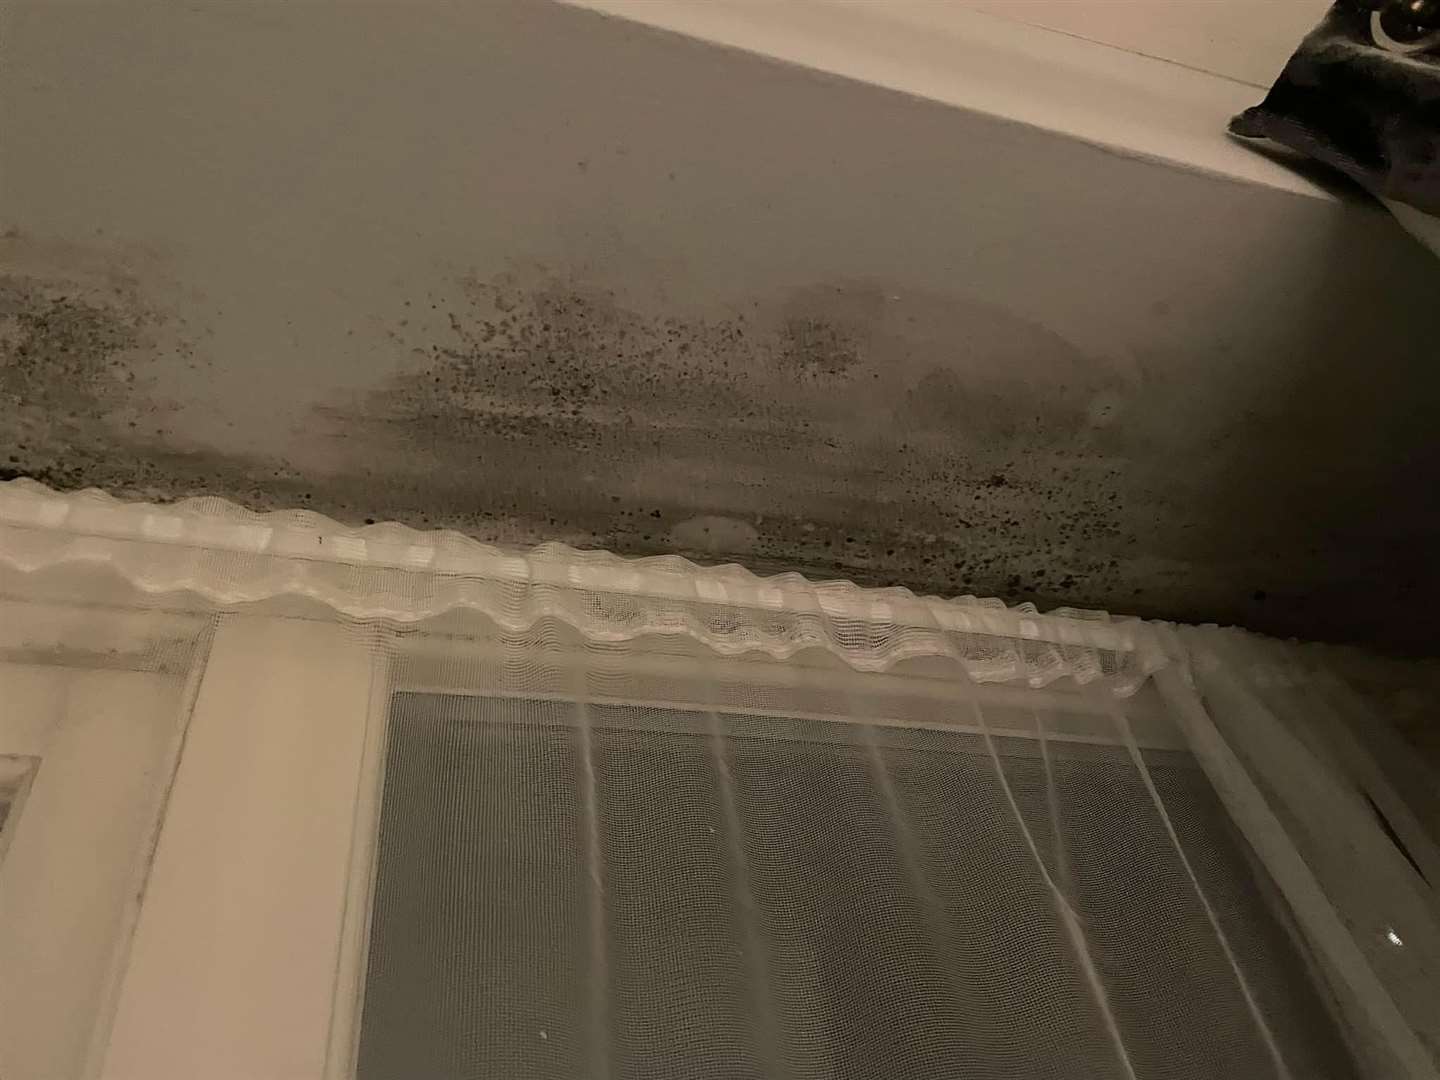 One of the flats I viewed had a serious mould problem (representational image)